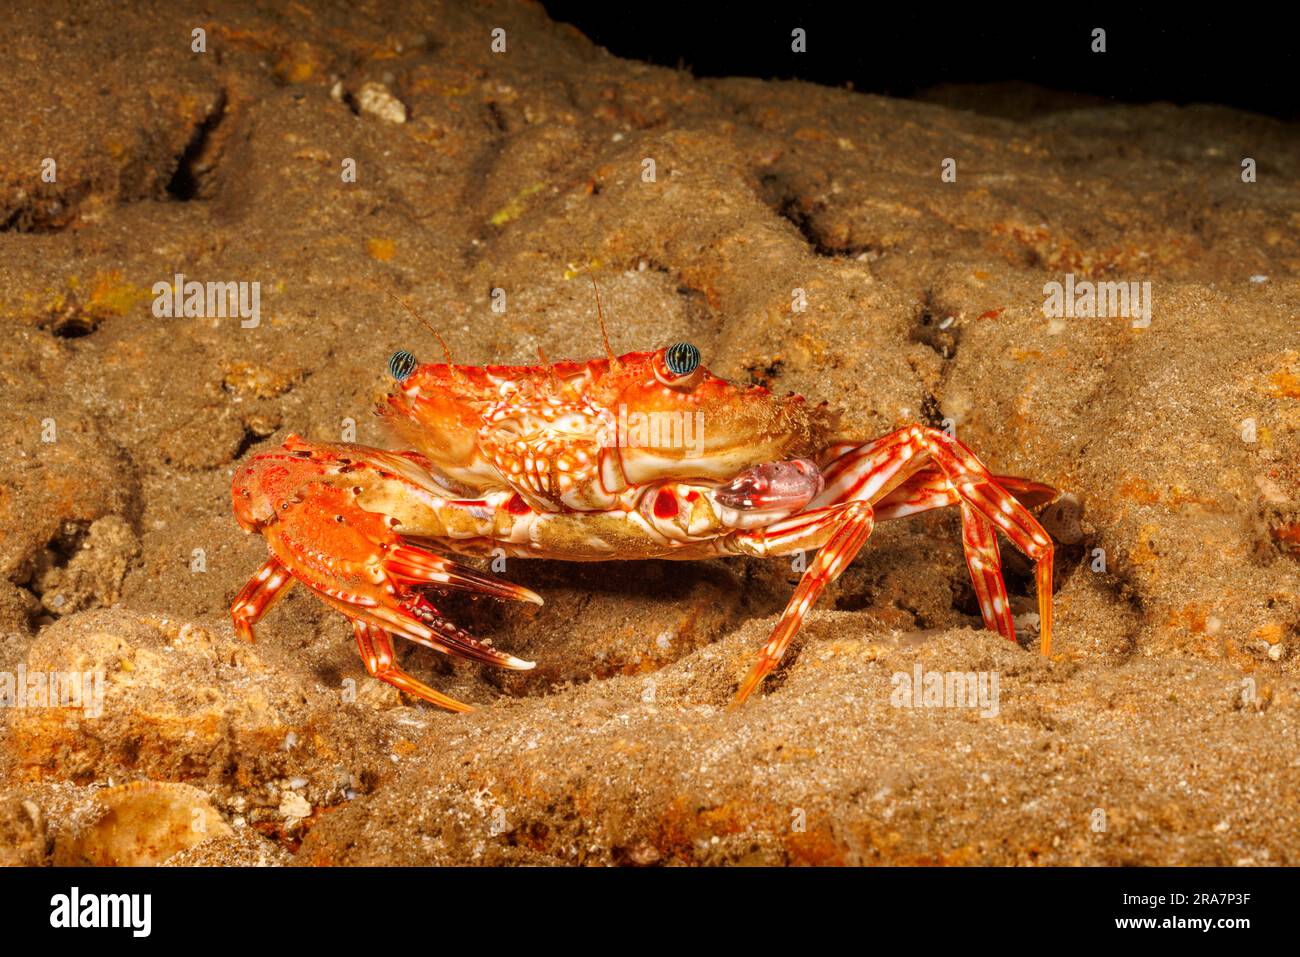 The Hawaiian swimming crab, Charybdis hawaiensis, usually has two claws about the same size. This adult has lost one and has begun regenerating the fo Stock Photo